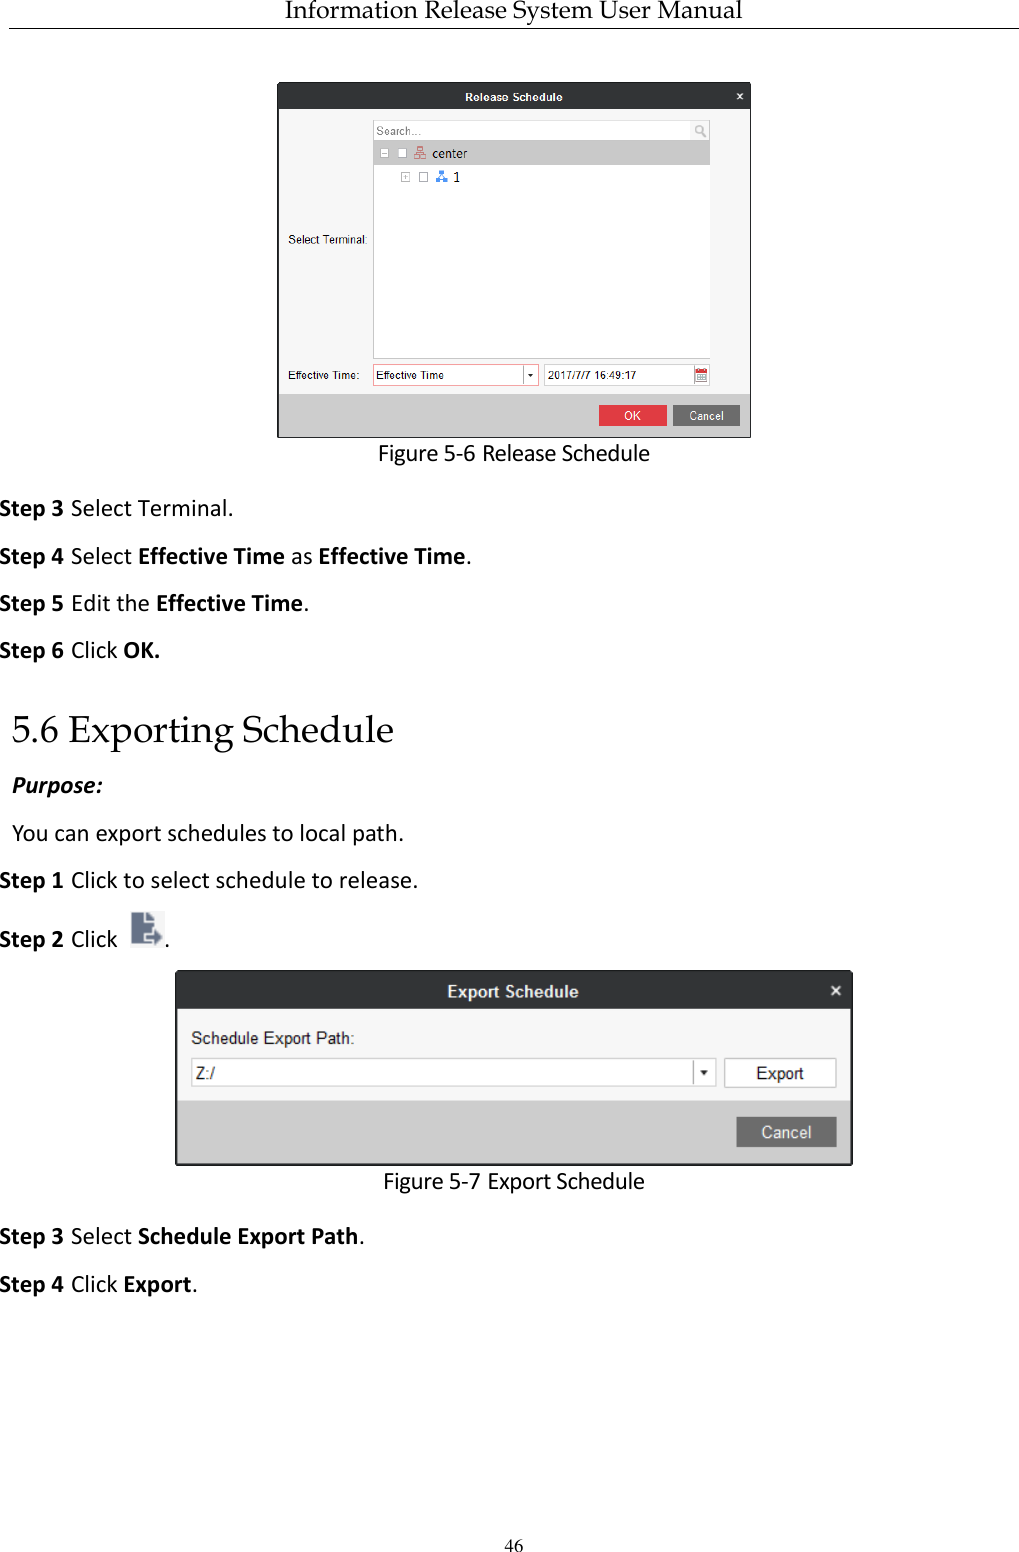 Information Release System User Manual 46  Figure 5-6 Release Schedule Step 3 Select Terminal. Step 4 Select Effective Time as Effective Time.   Step 5 Edit the Effective Time. Step 6 Click OK. 5.6 Exporting Schedule Purpose: You can export schedules to local path. Step 1 Click to select schedule to release. Step 2 Click  .  Figure 5-7 Export Schedule Step 3 Select Schedule Export Path. Step 4 Click Export. 